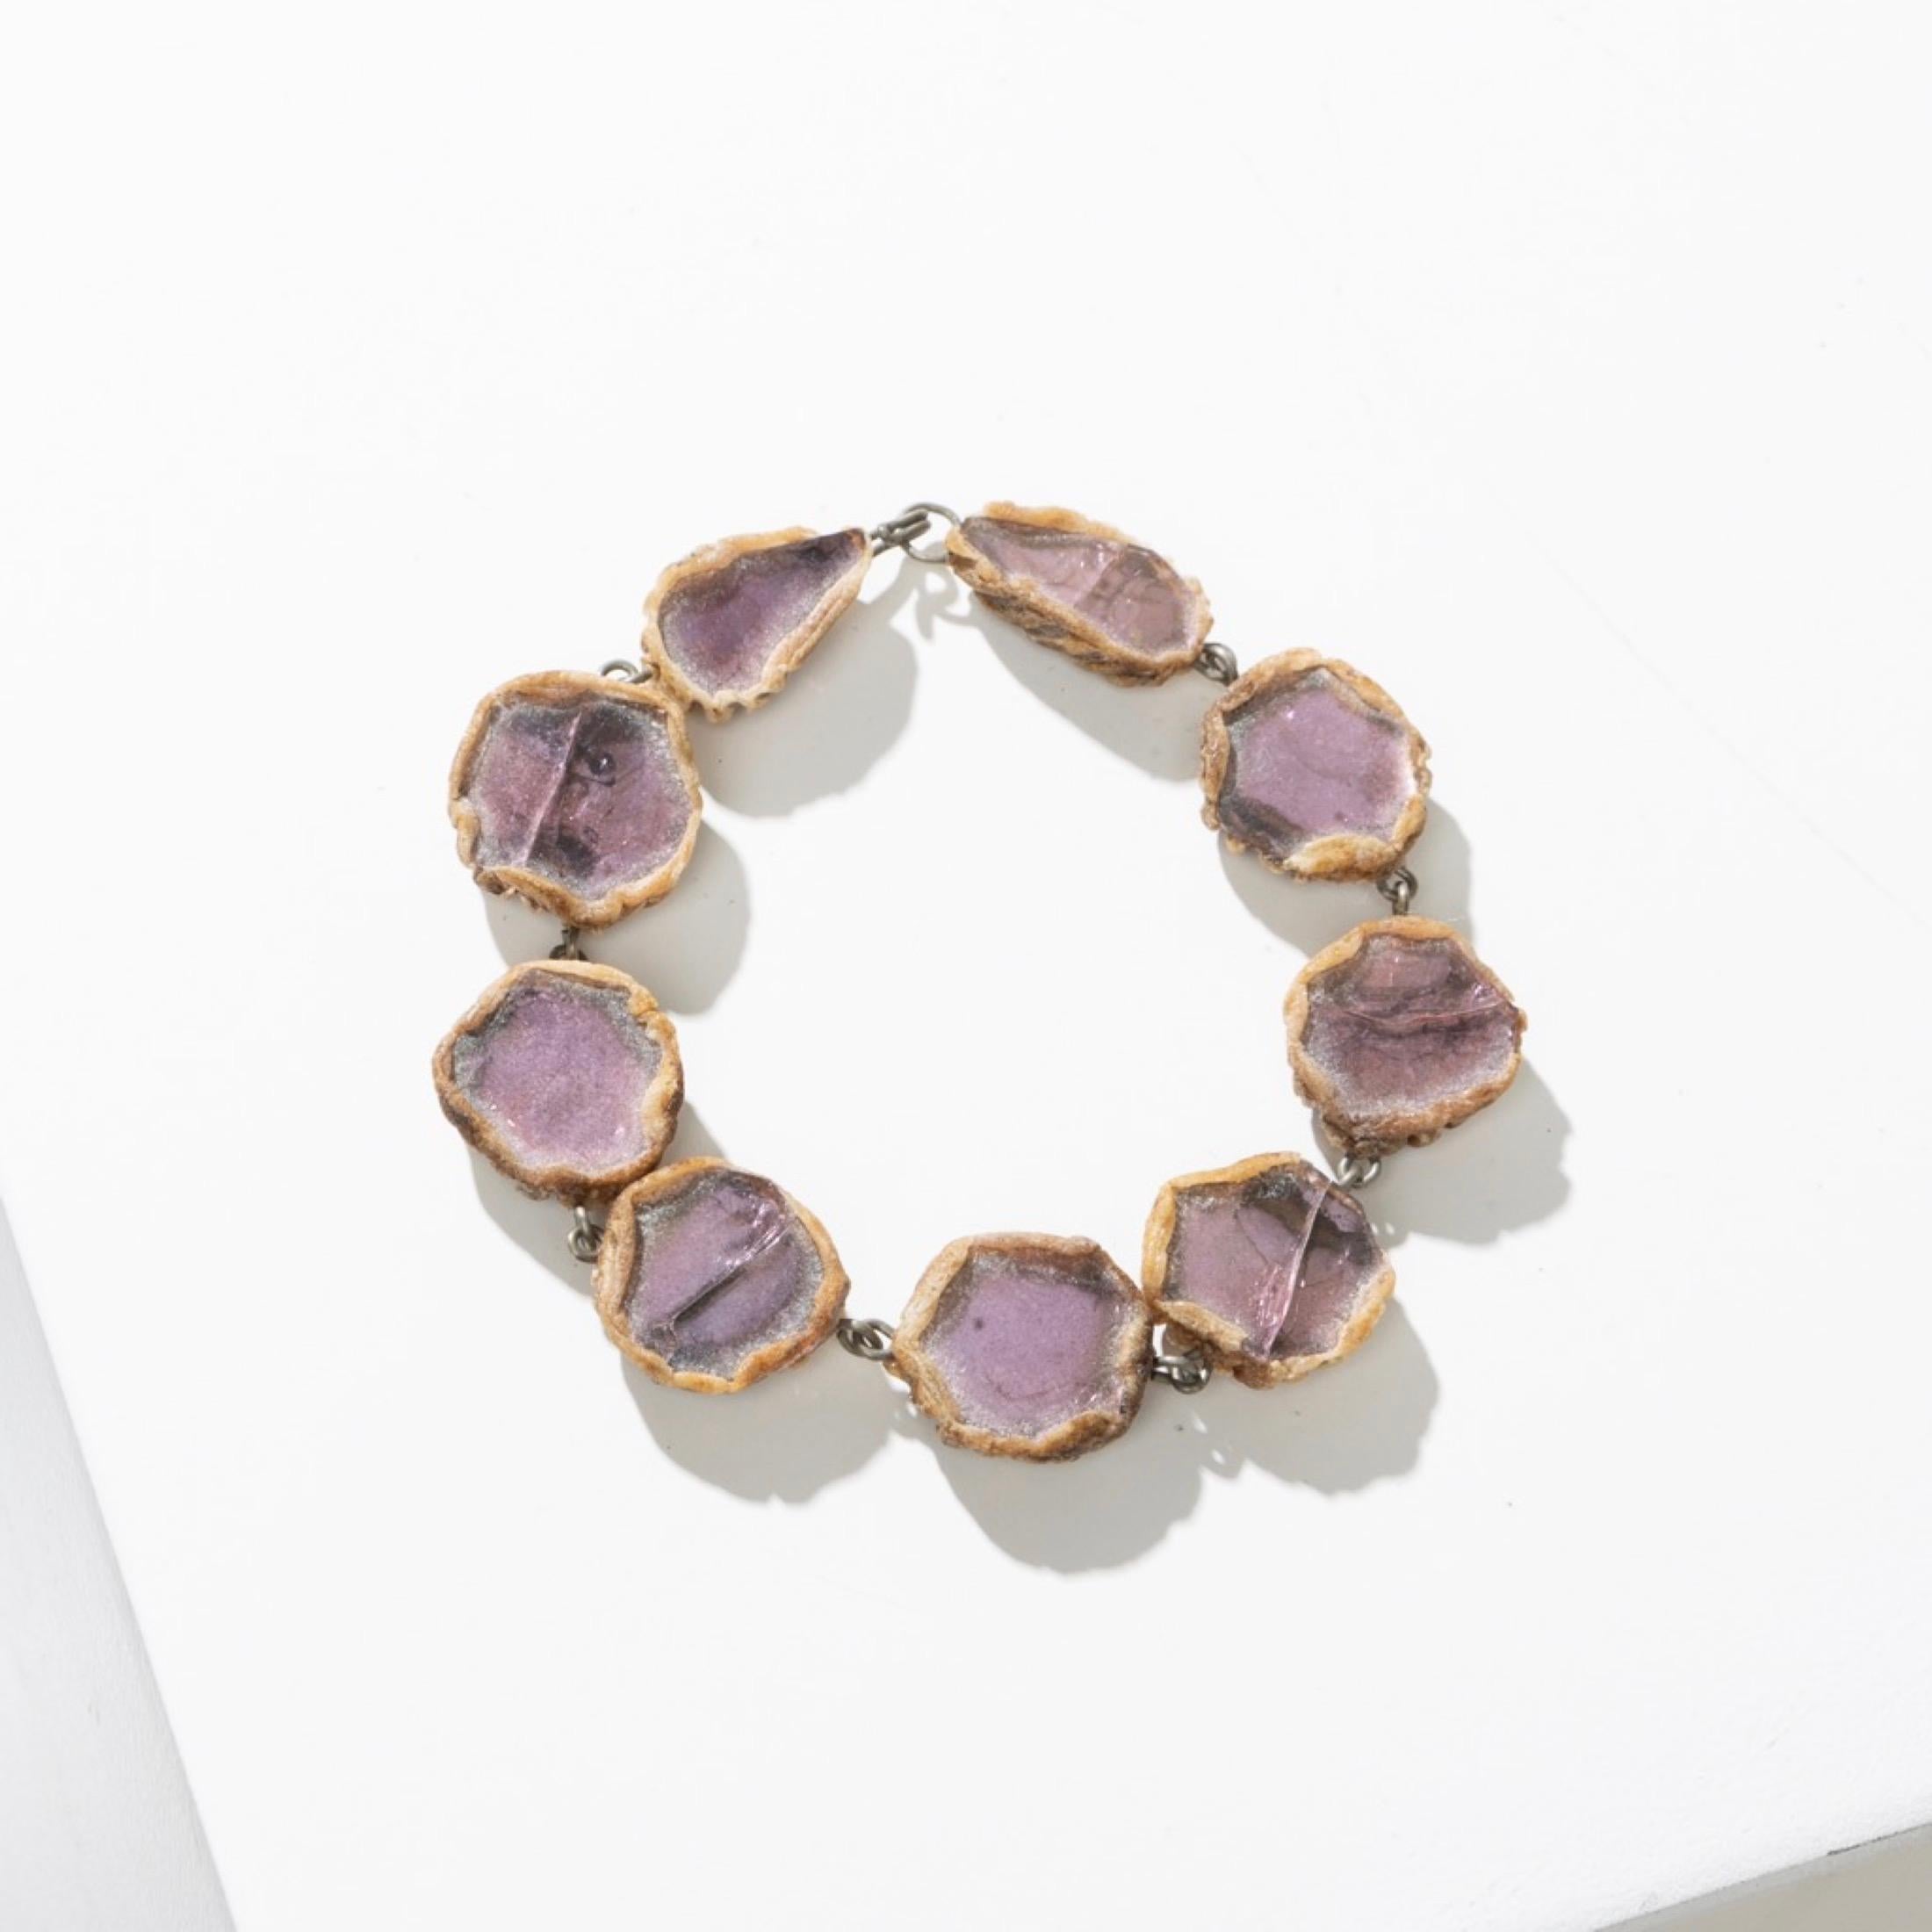 This beige Talosel bracelet has been meticulously hand-sculpted by scarification to create an organic shape reminiscent of the emblematic creations of Line Vautrin.
Each link, there are seven in total, is adorned with purple mirrors subtly embedded